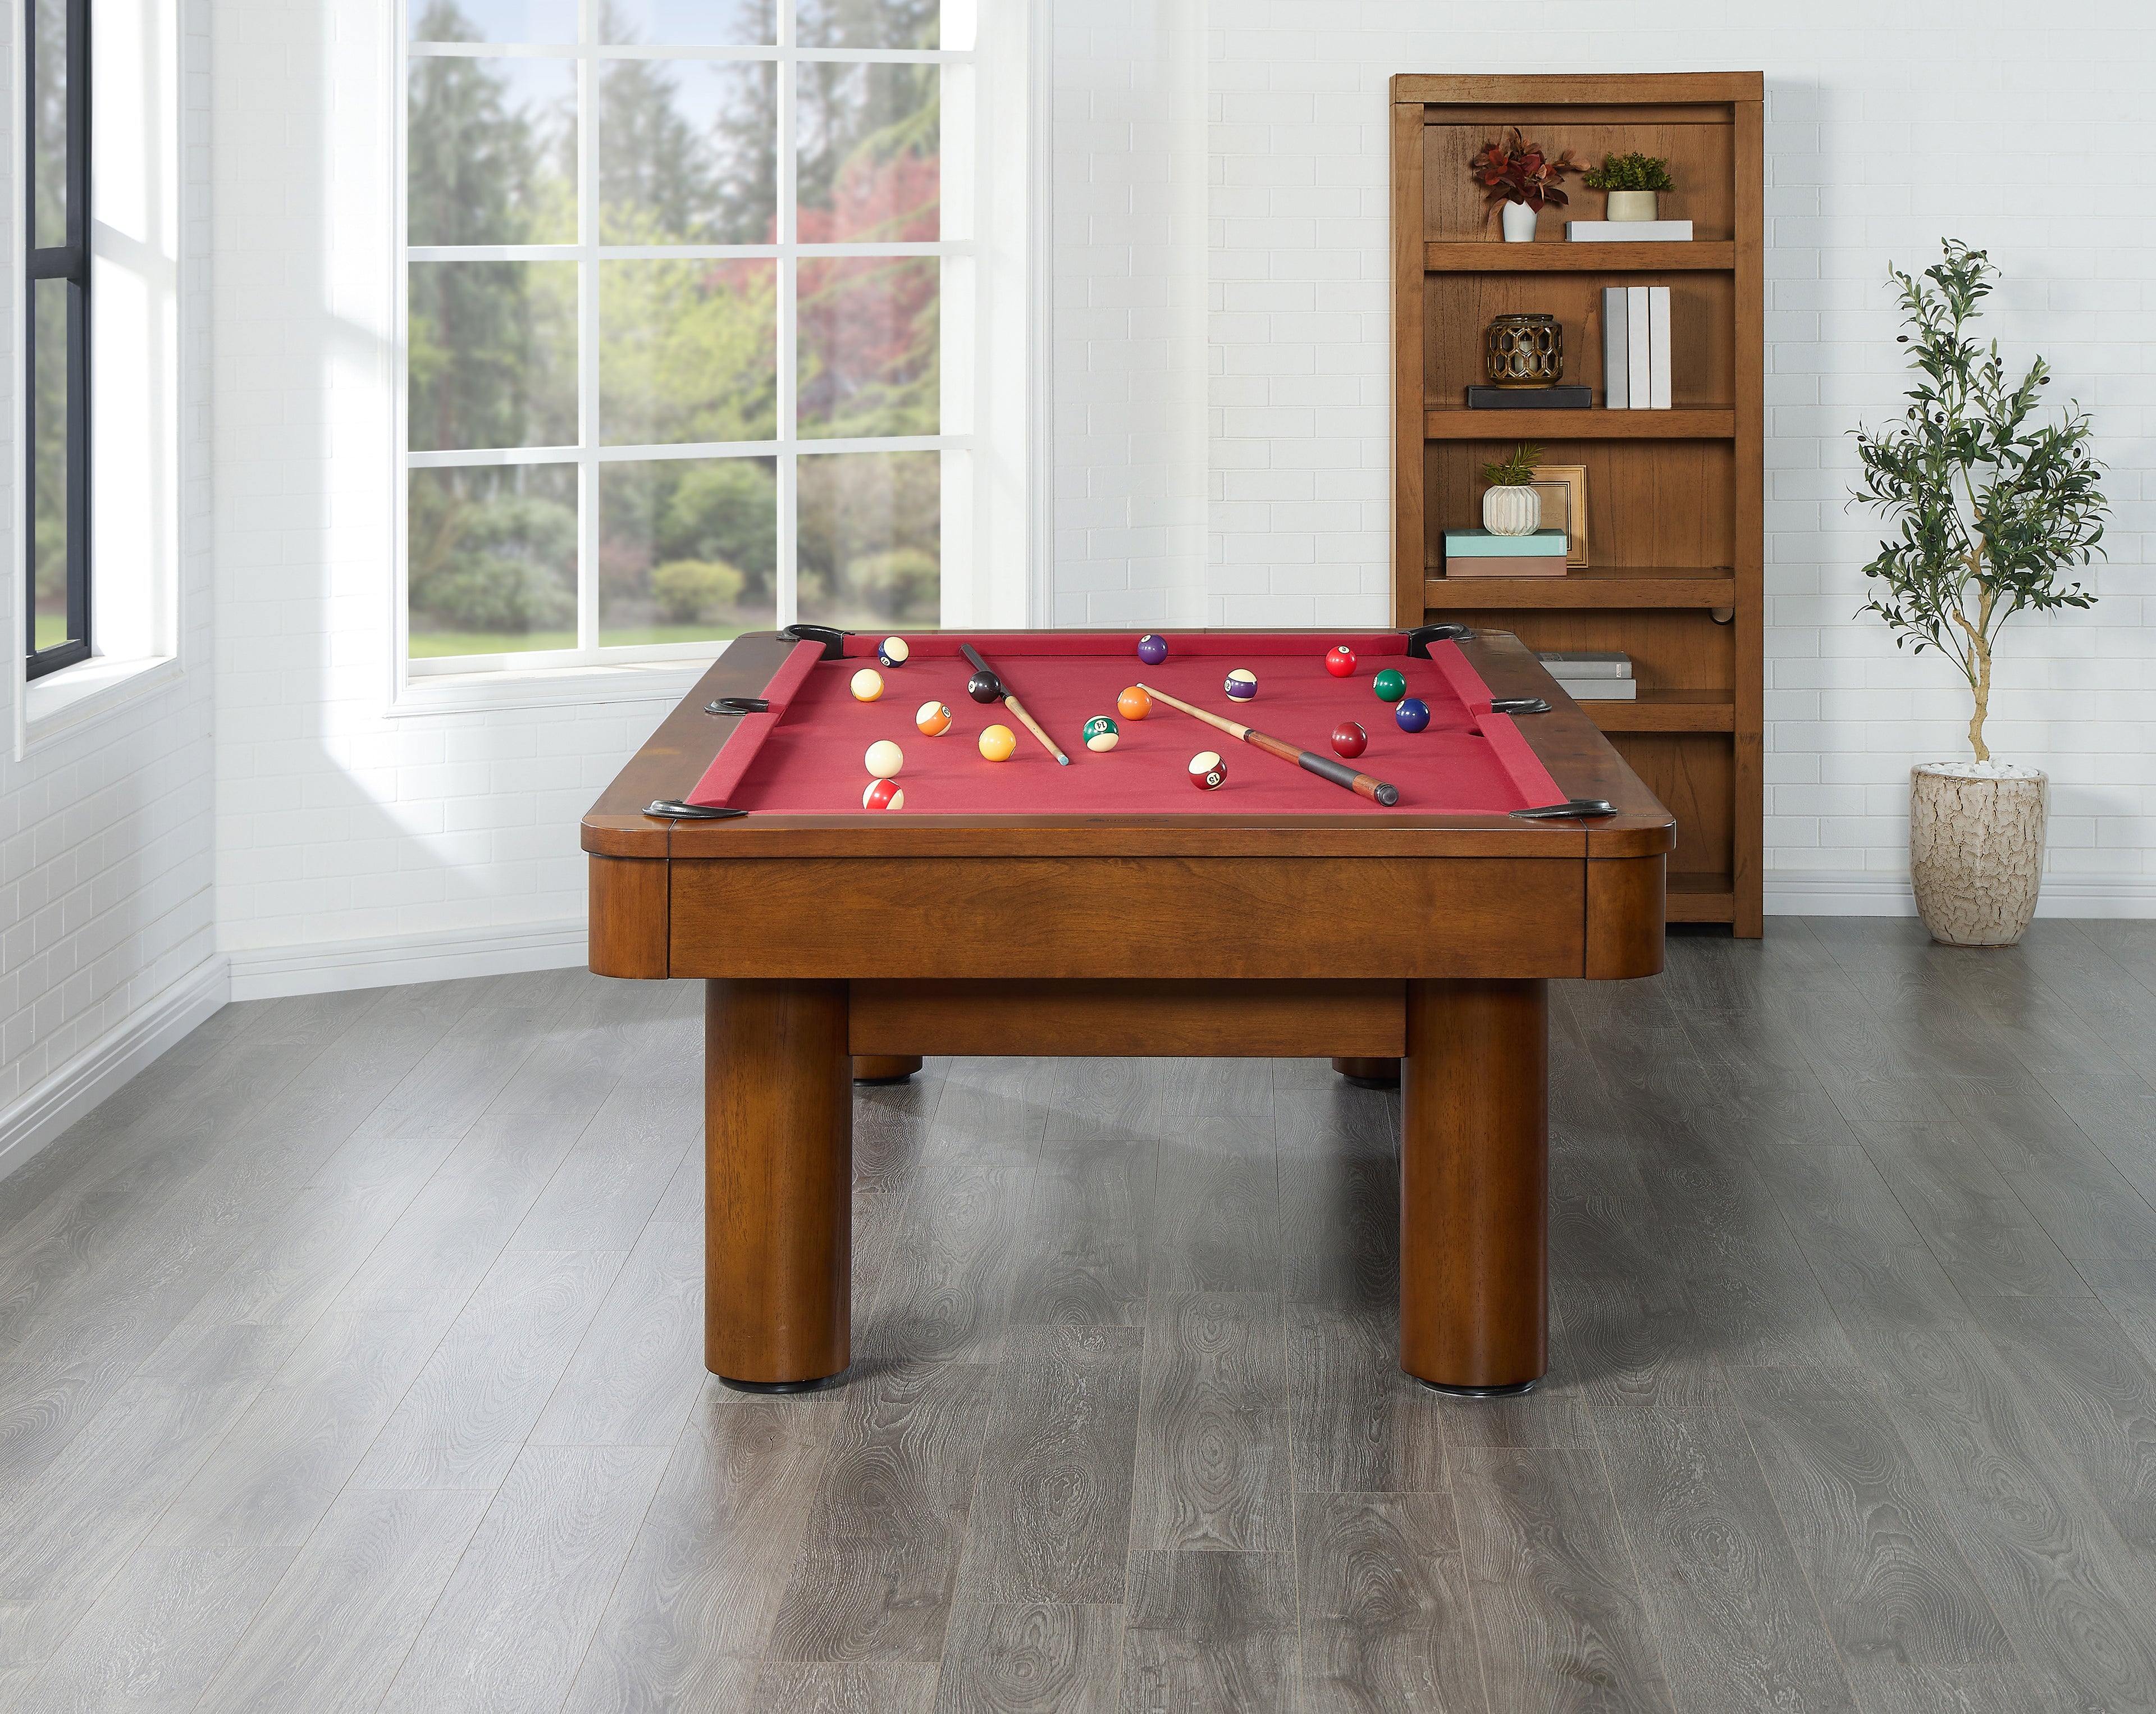 Legacy Billiards Dillard 7 Ft Pool Table in Walnut Finish with Red Cloth - Room Scene - End View